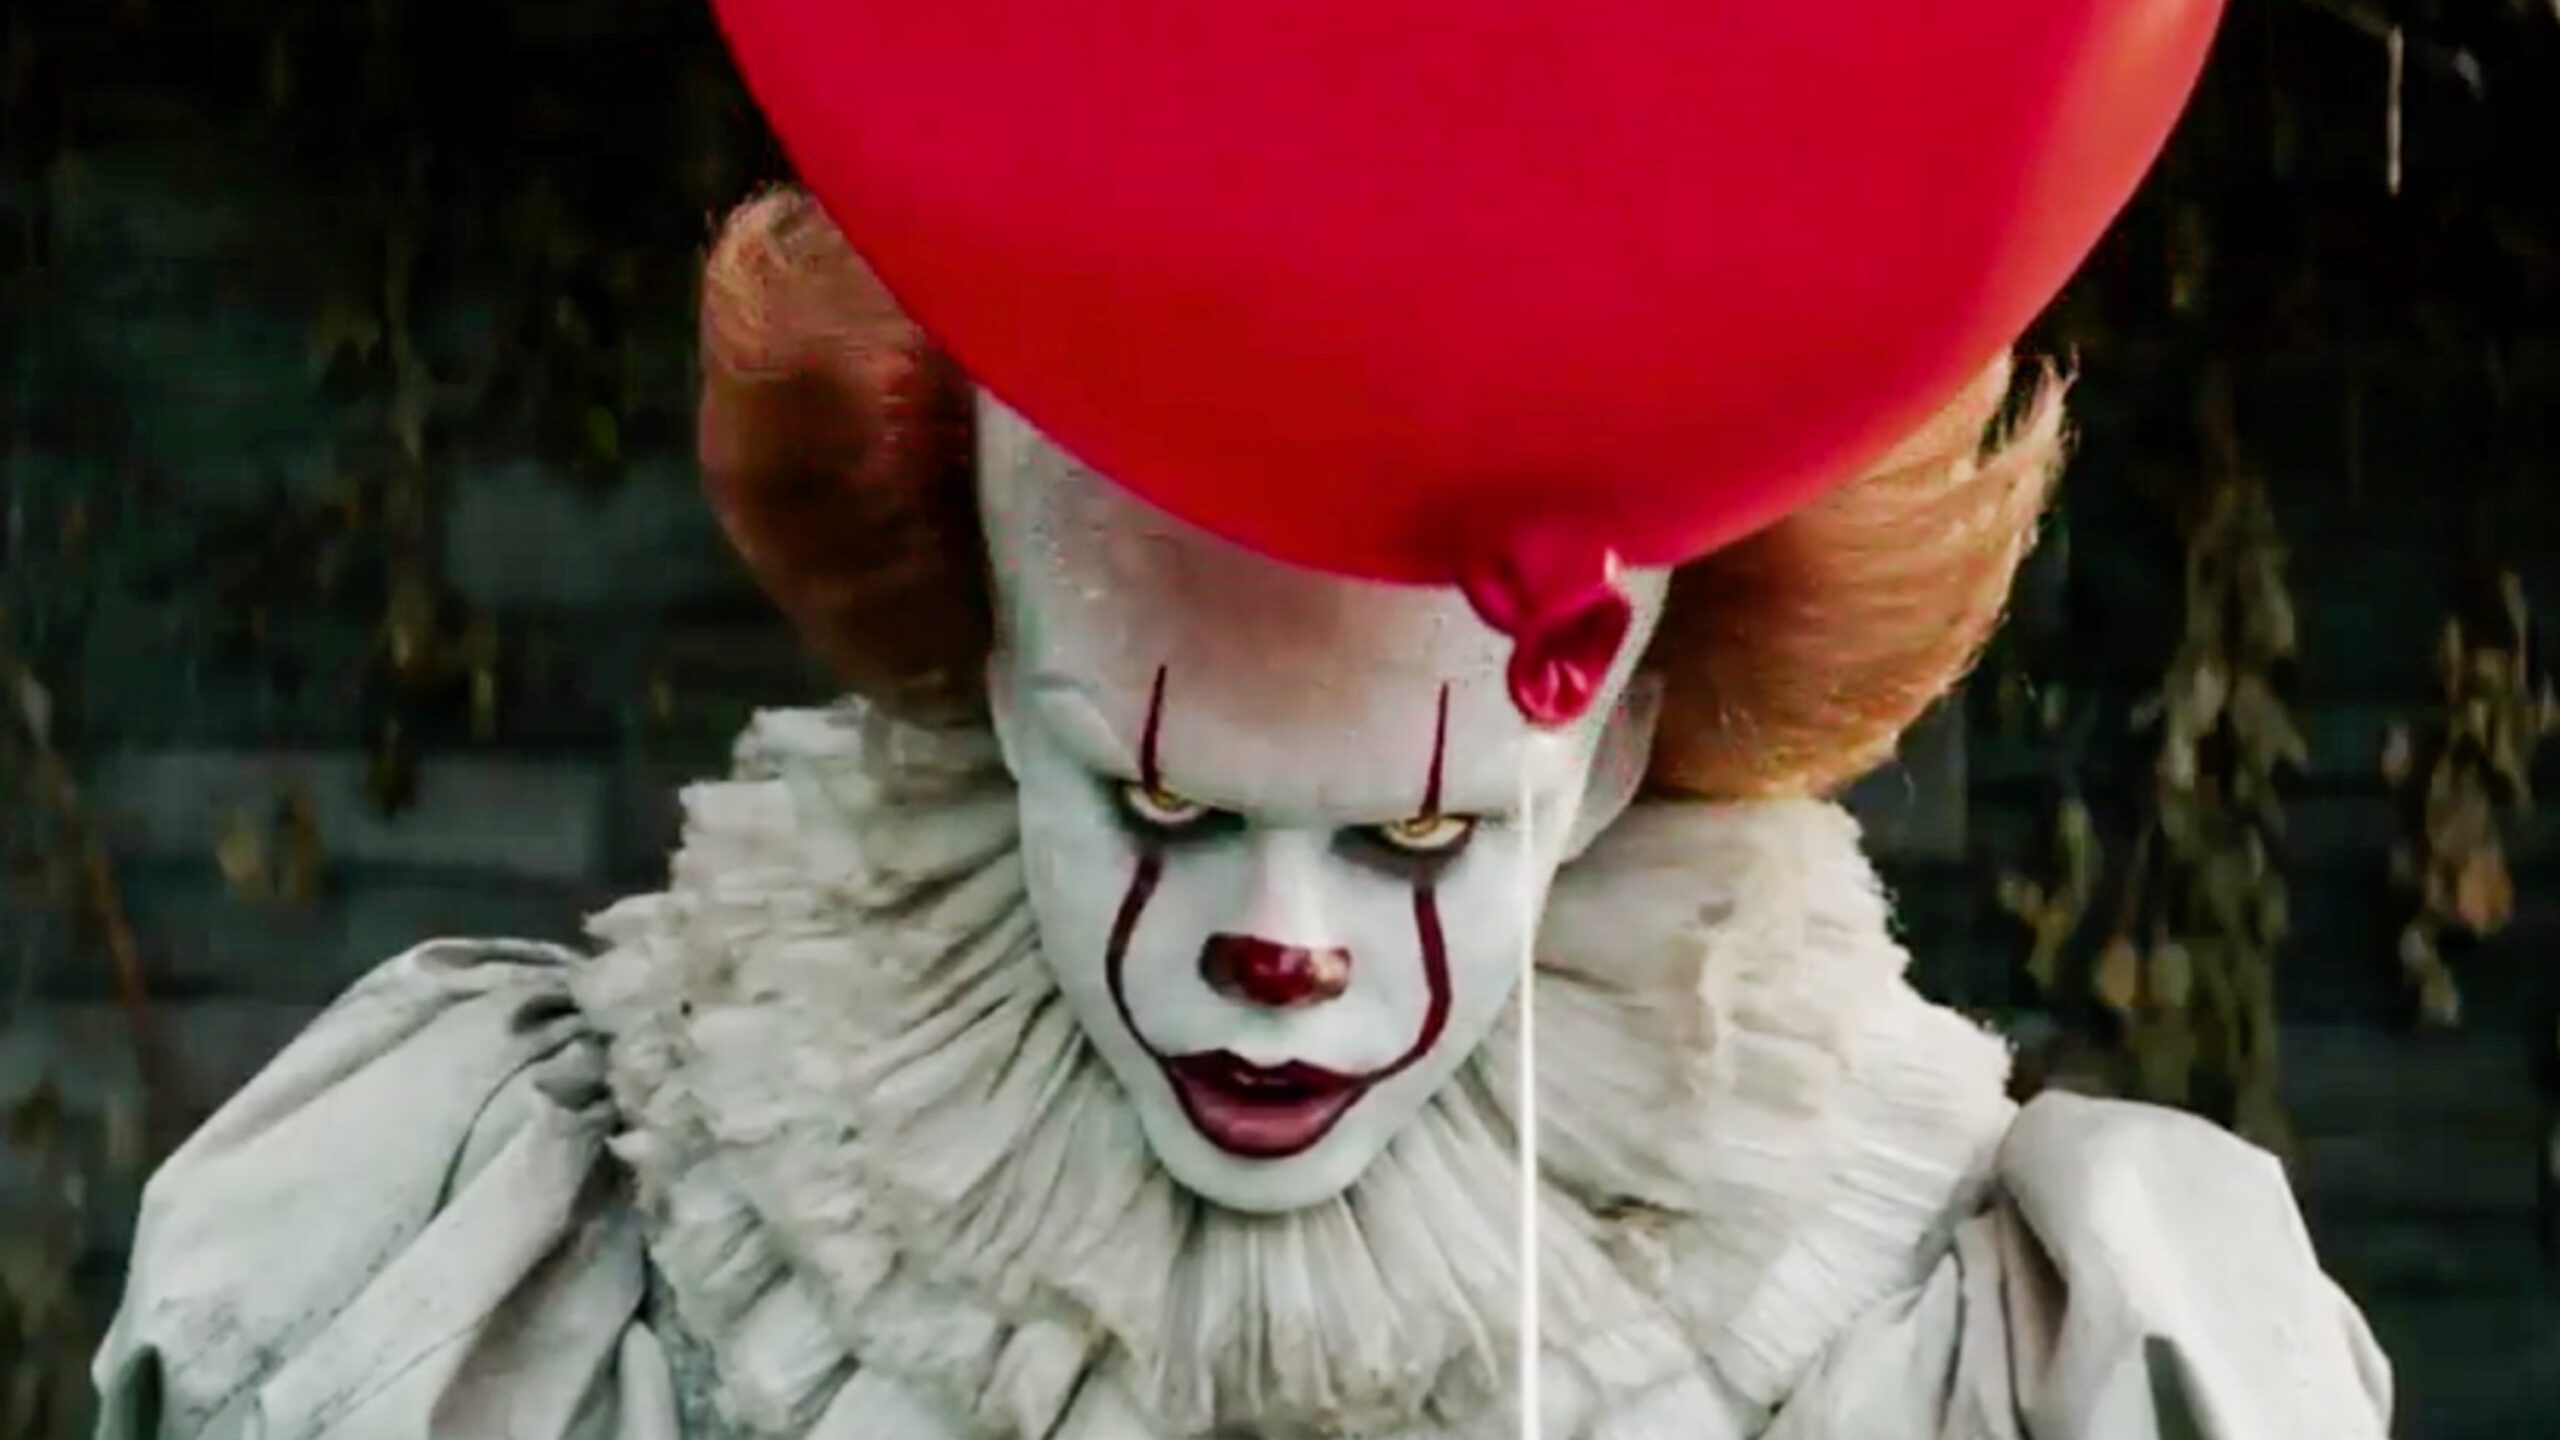 WATCH: Creepy new trailer for ‘It’ released